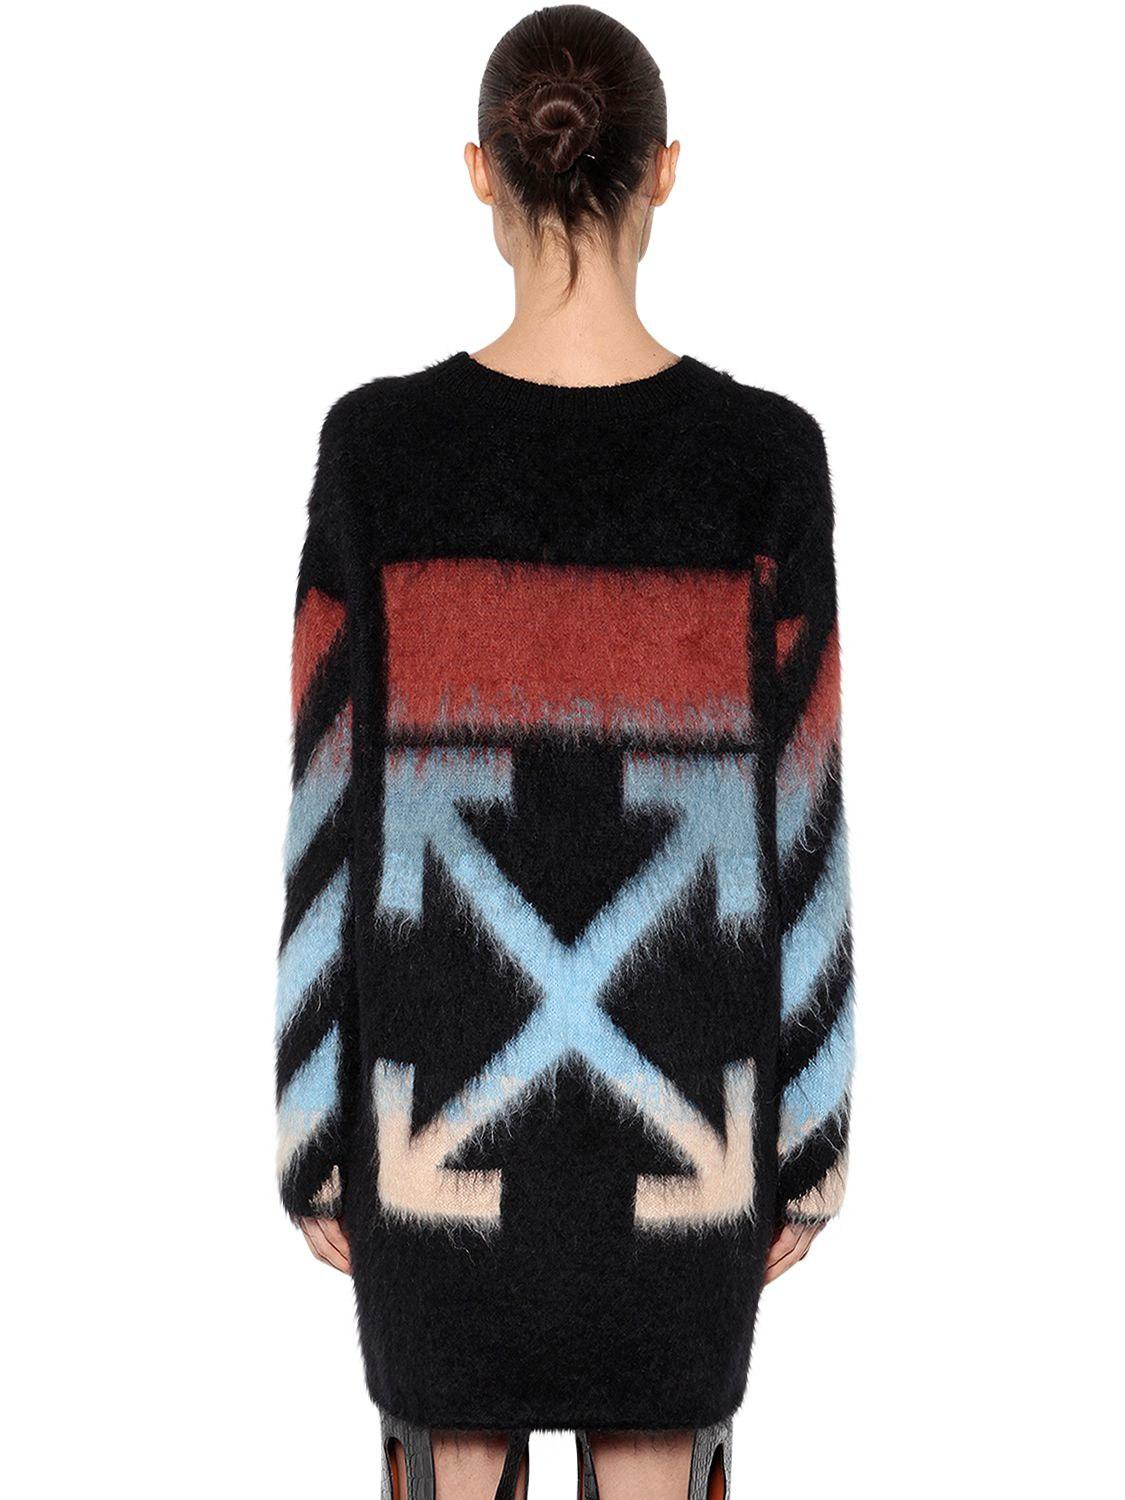 Off-White c/o Virgil Abloh Oversized Mohair Knit Sweater in Black | Lyst  Canada